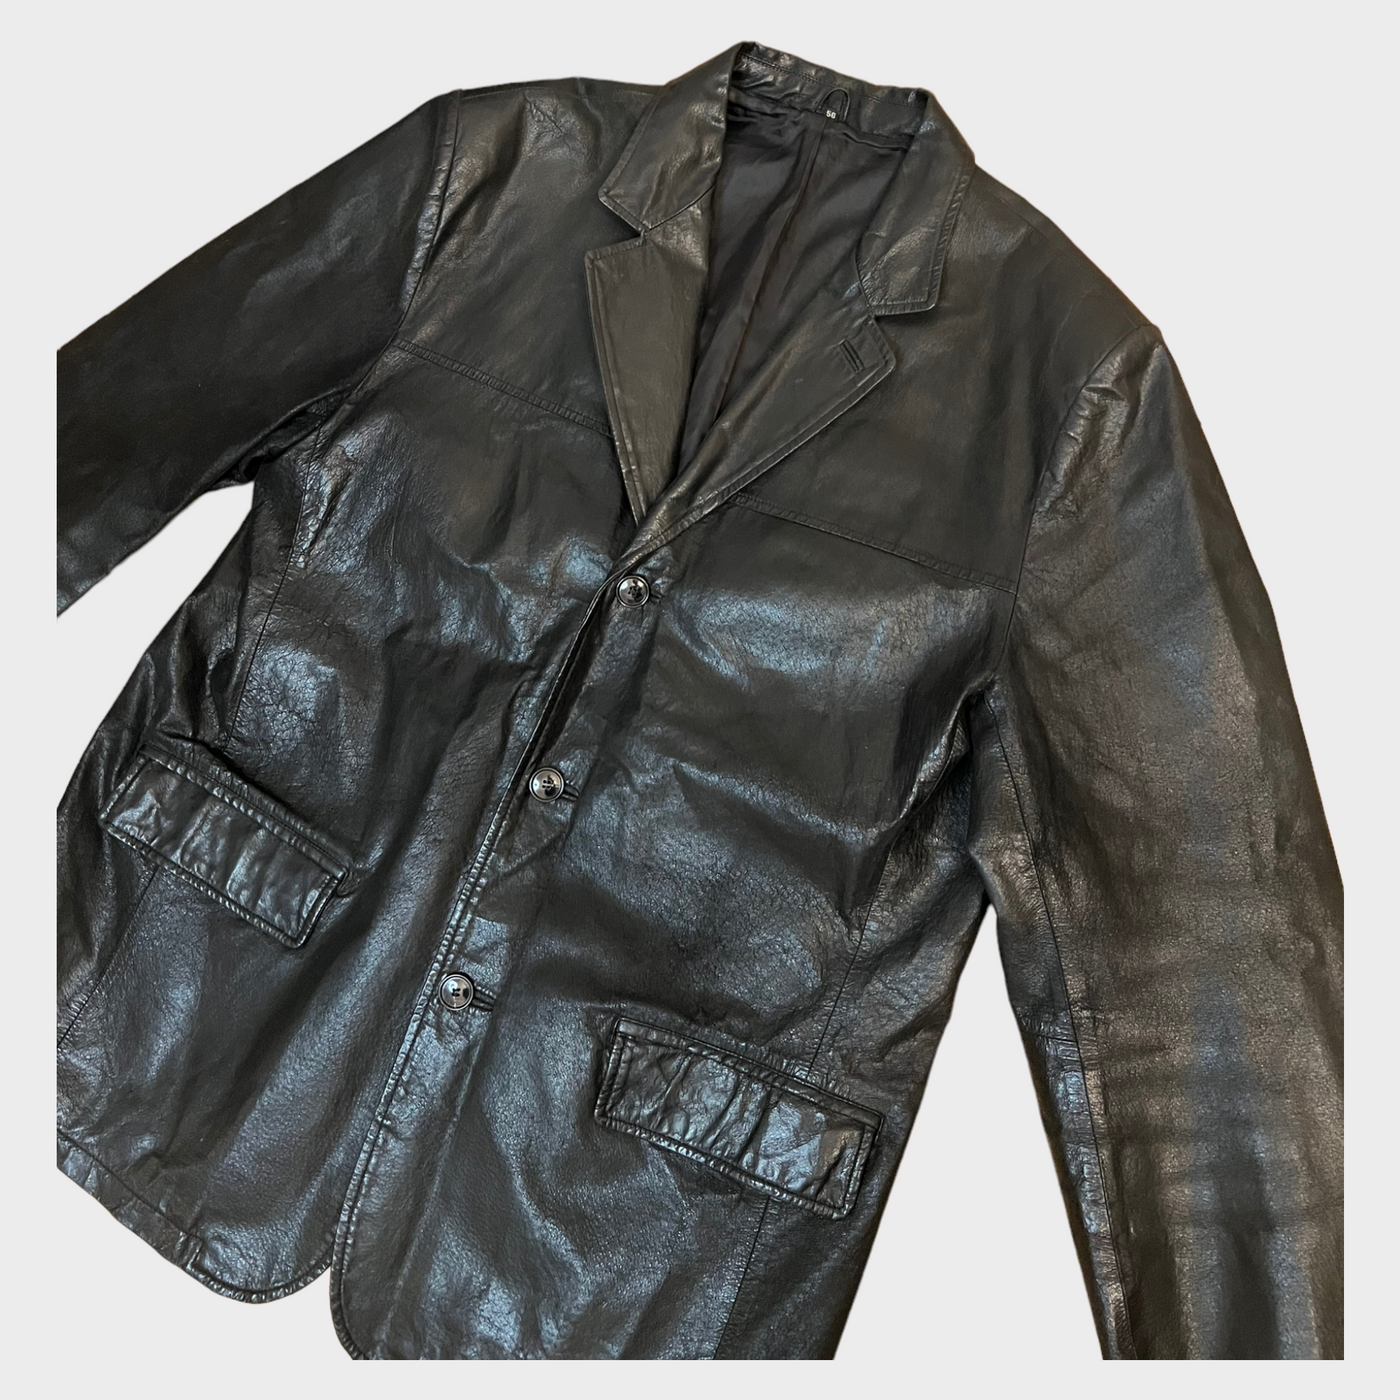 Close-up of the Leather Blazer Jacket in black leather.